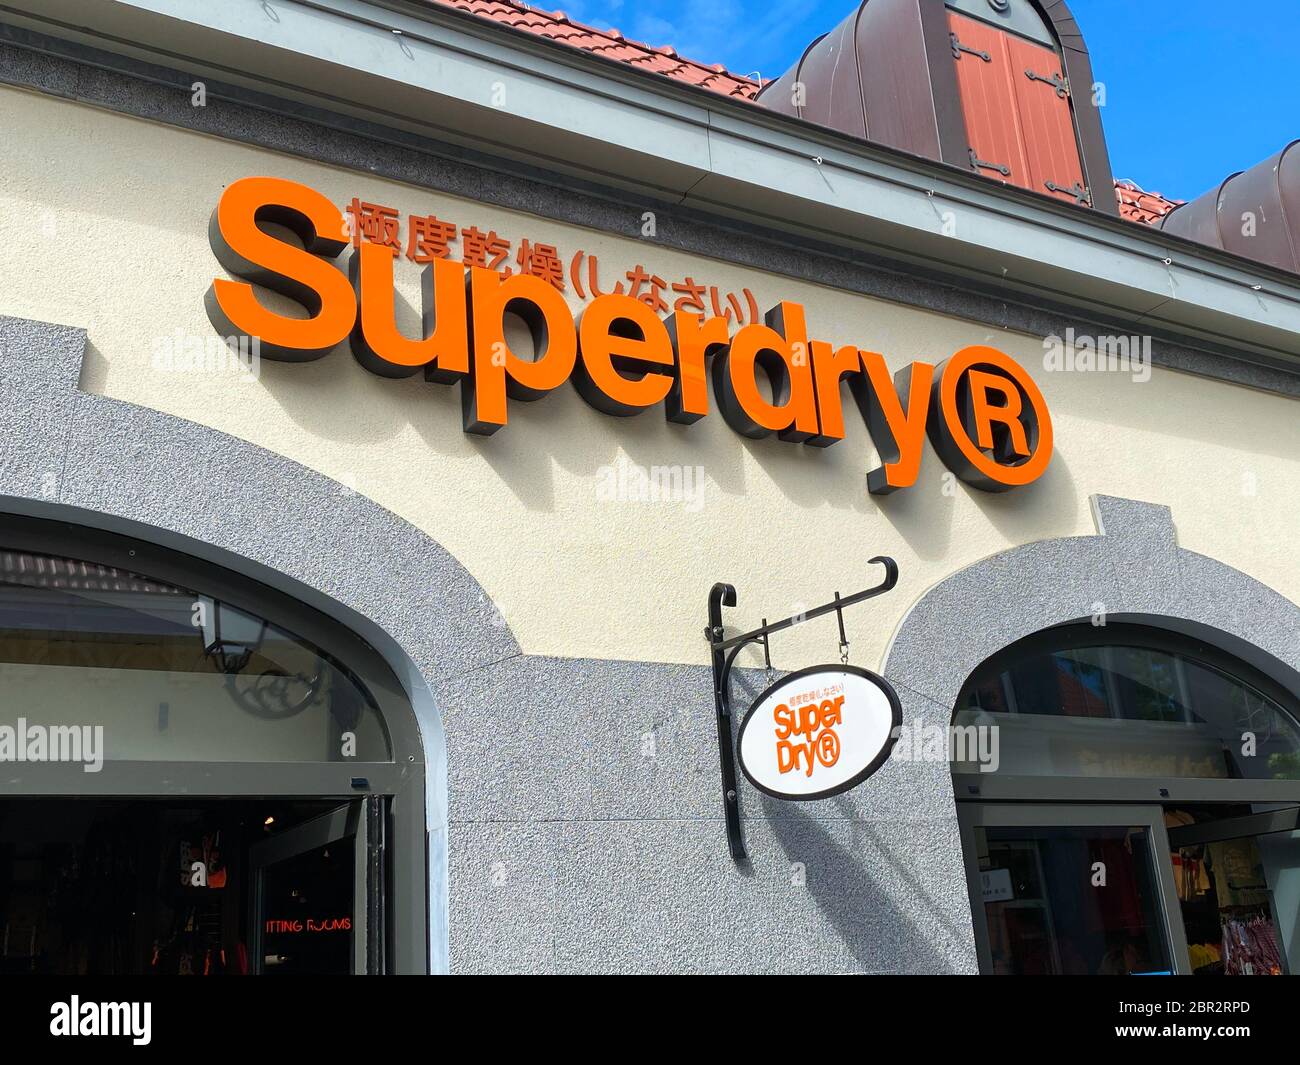 Roermond, Netherlands - May 19. 2020: View on facade with logo lettering of  Superdry fashion company at shop entrance Stock Photo - Alamy